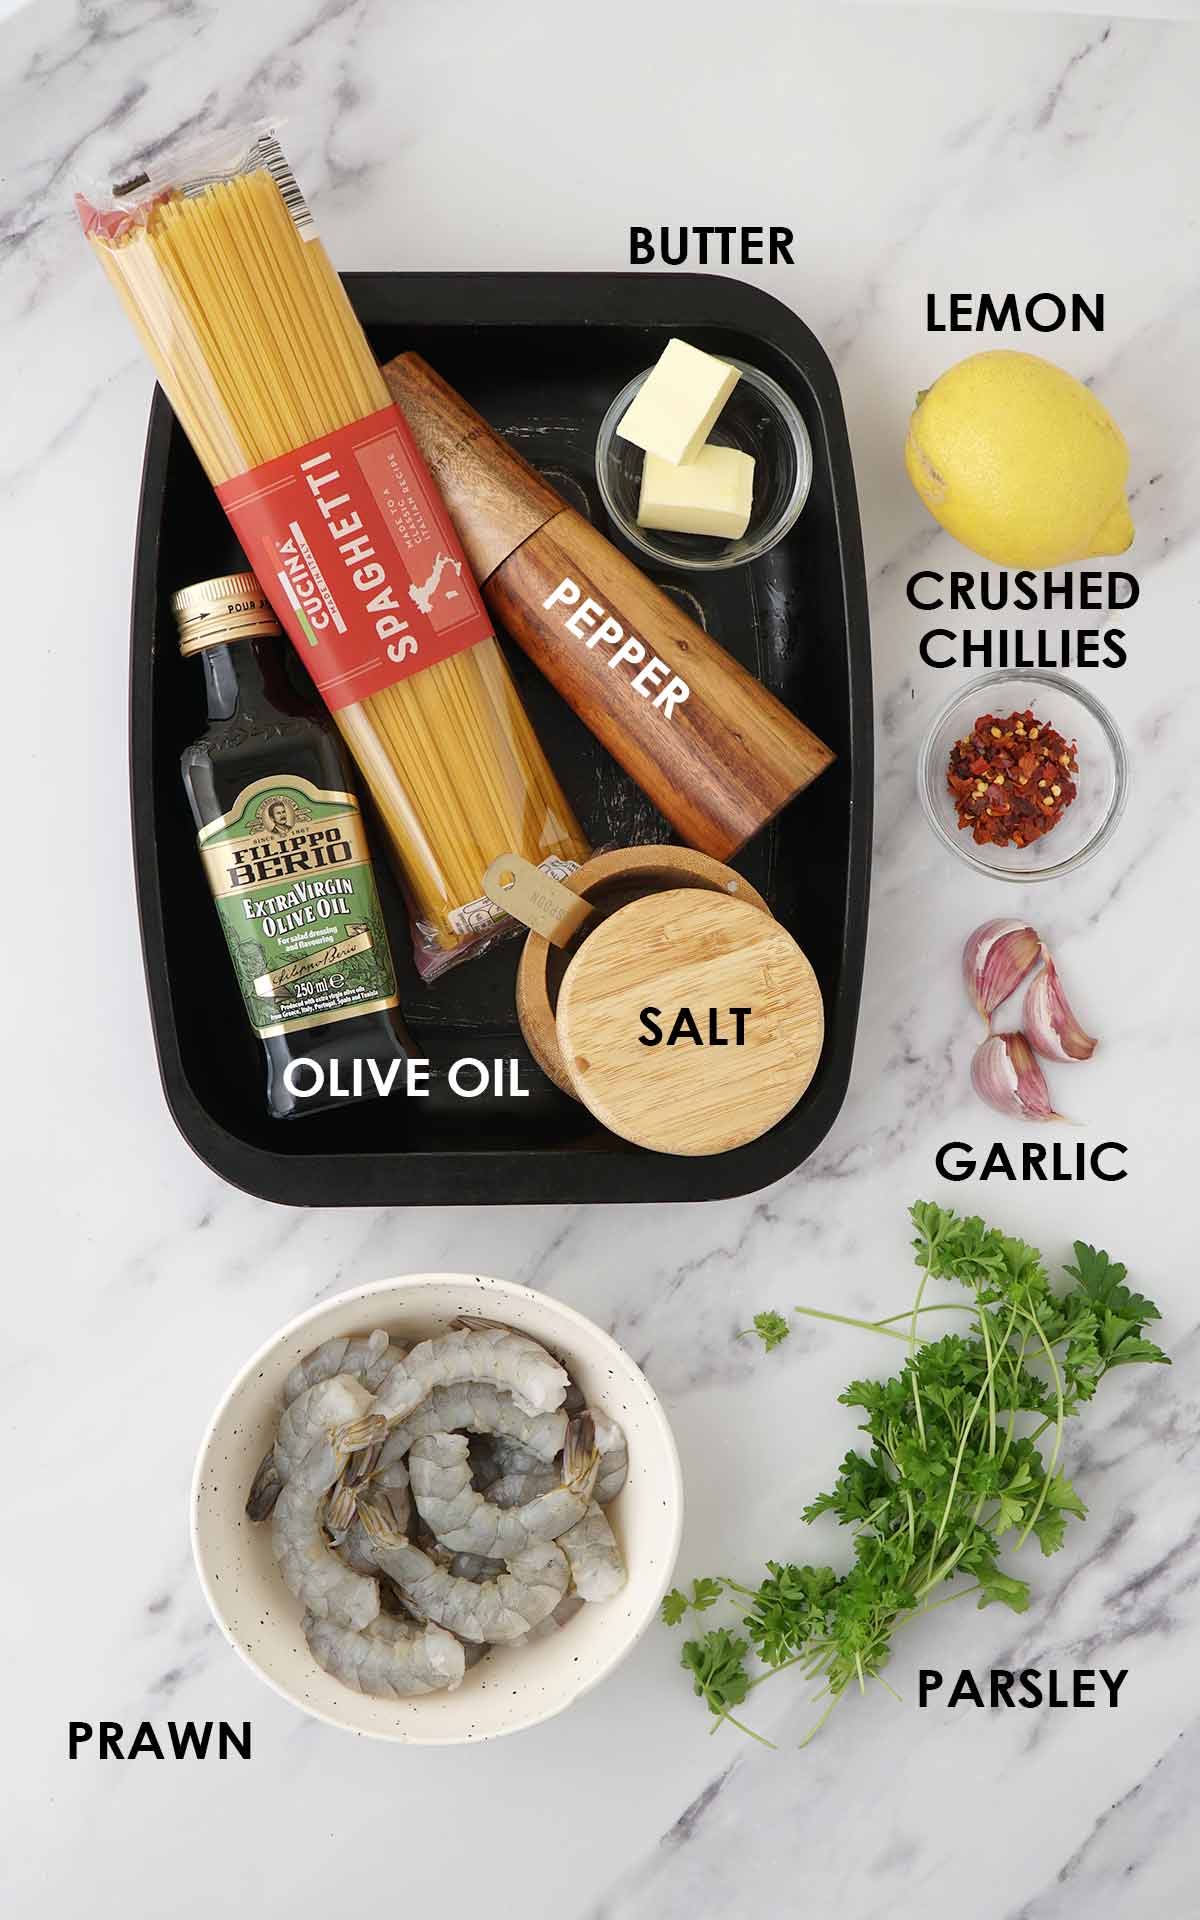 Labelled ingredients of making shrimp spaghetti displayed on the white table.